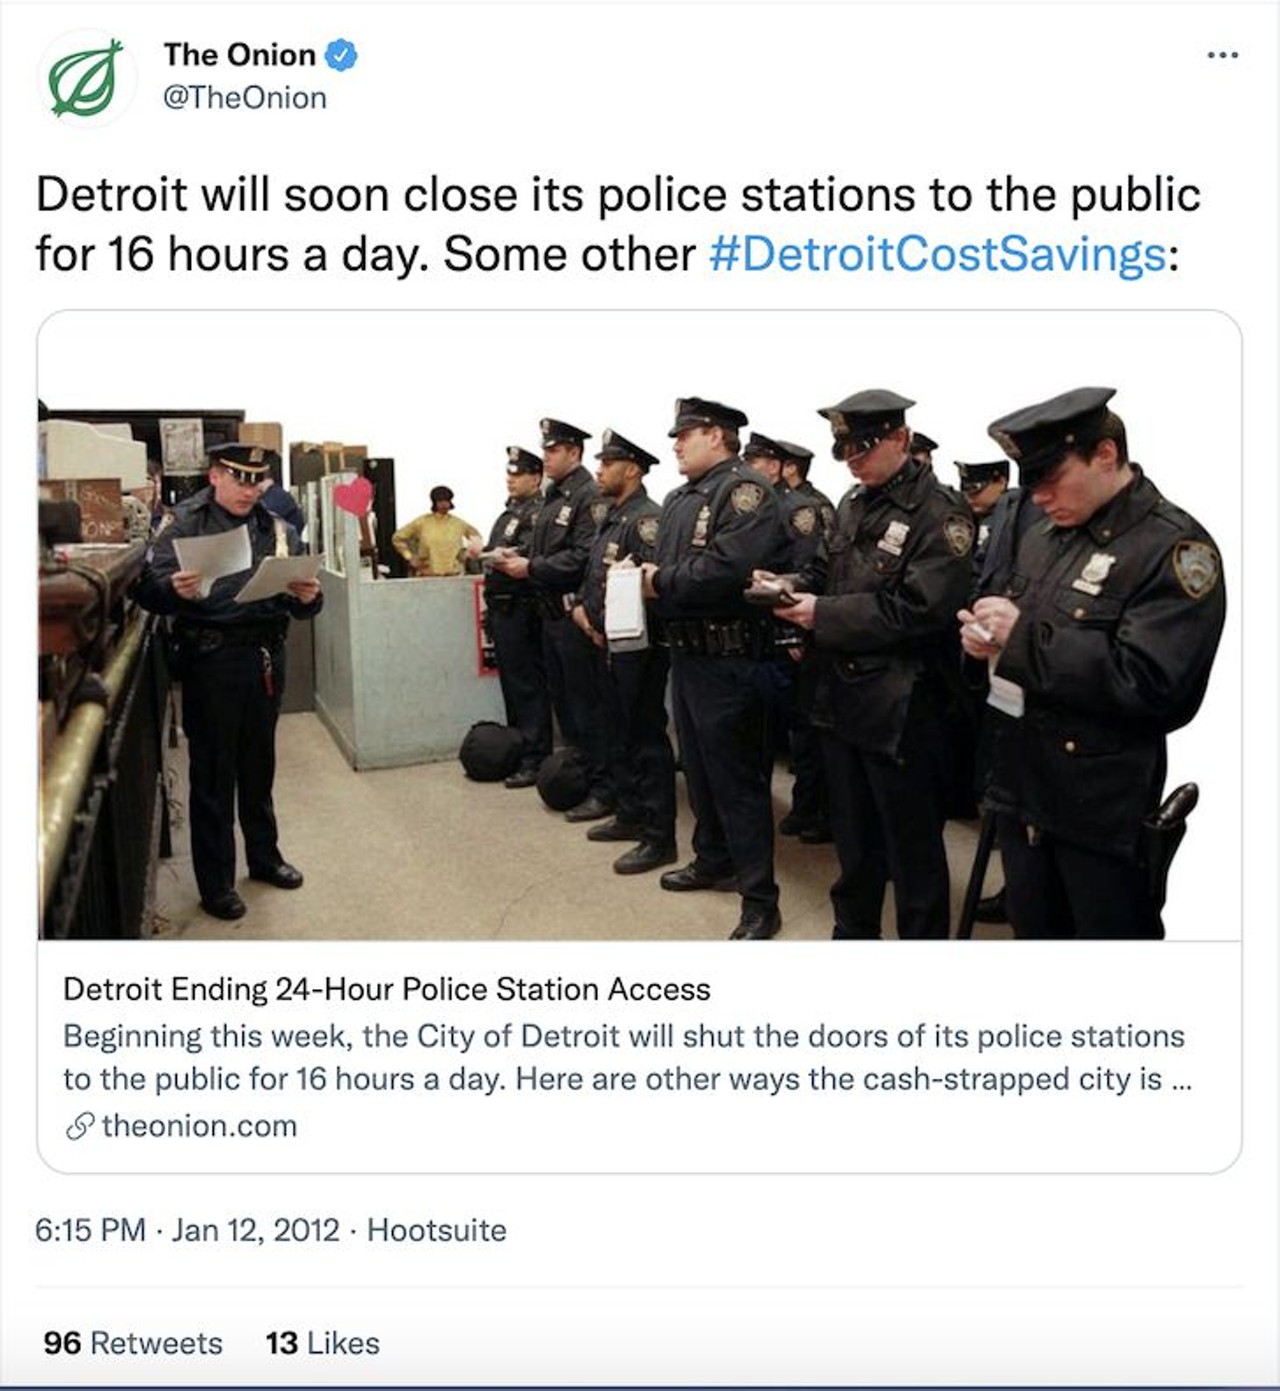 Detroit will soon close its police stations to the public for 16 hours a day. Some other #DetroitCostSavings:
In an attempt to cut city costs, Detroit announces that police stations will be closed to the public 16 hours a day as keeping stations open 24 hours a day was far too expensive. Additionally, Detroit Police will be changing the emergency number to 912 to lower call income.